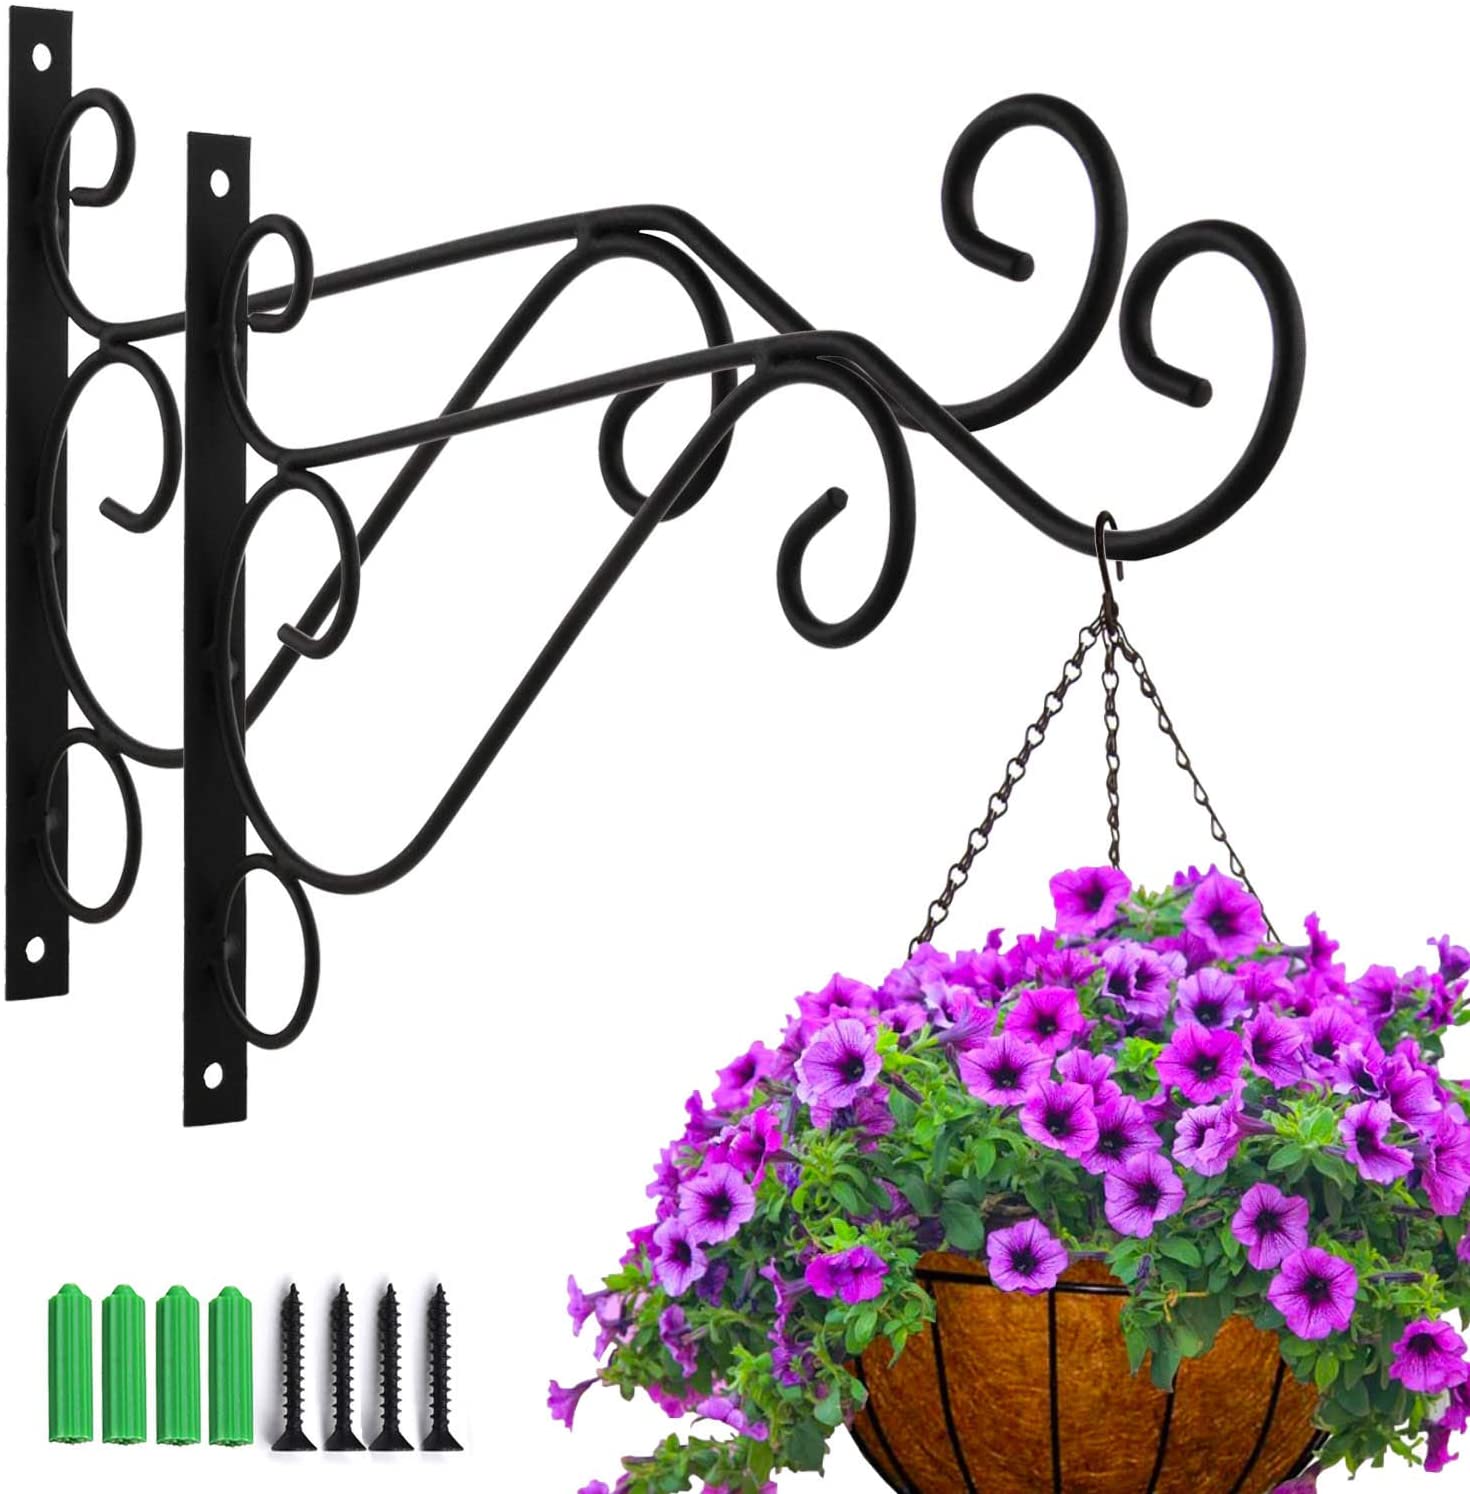 2 Pieces Wall Hanging Plant Hook With Screw Holder Plant Hook Lantern Bird Feeders Metal Garden Basket For Balcony Garden Decoration (Geometry) - image 1 of 5